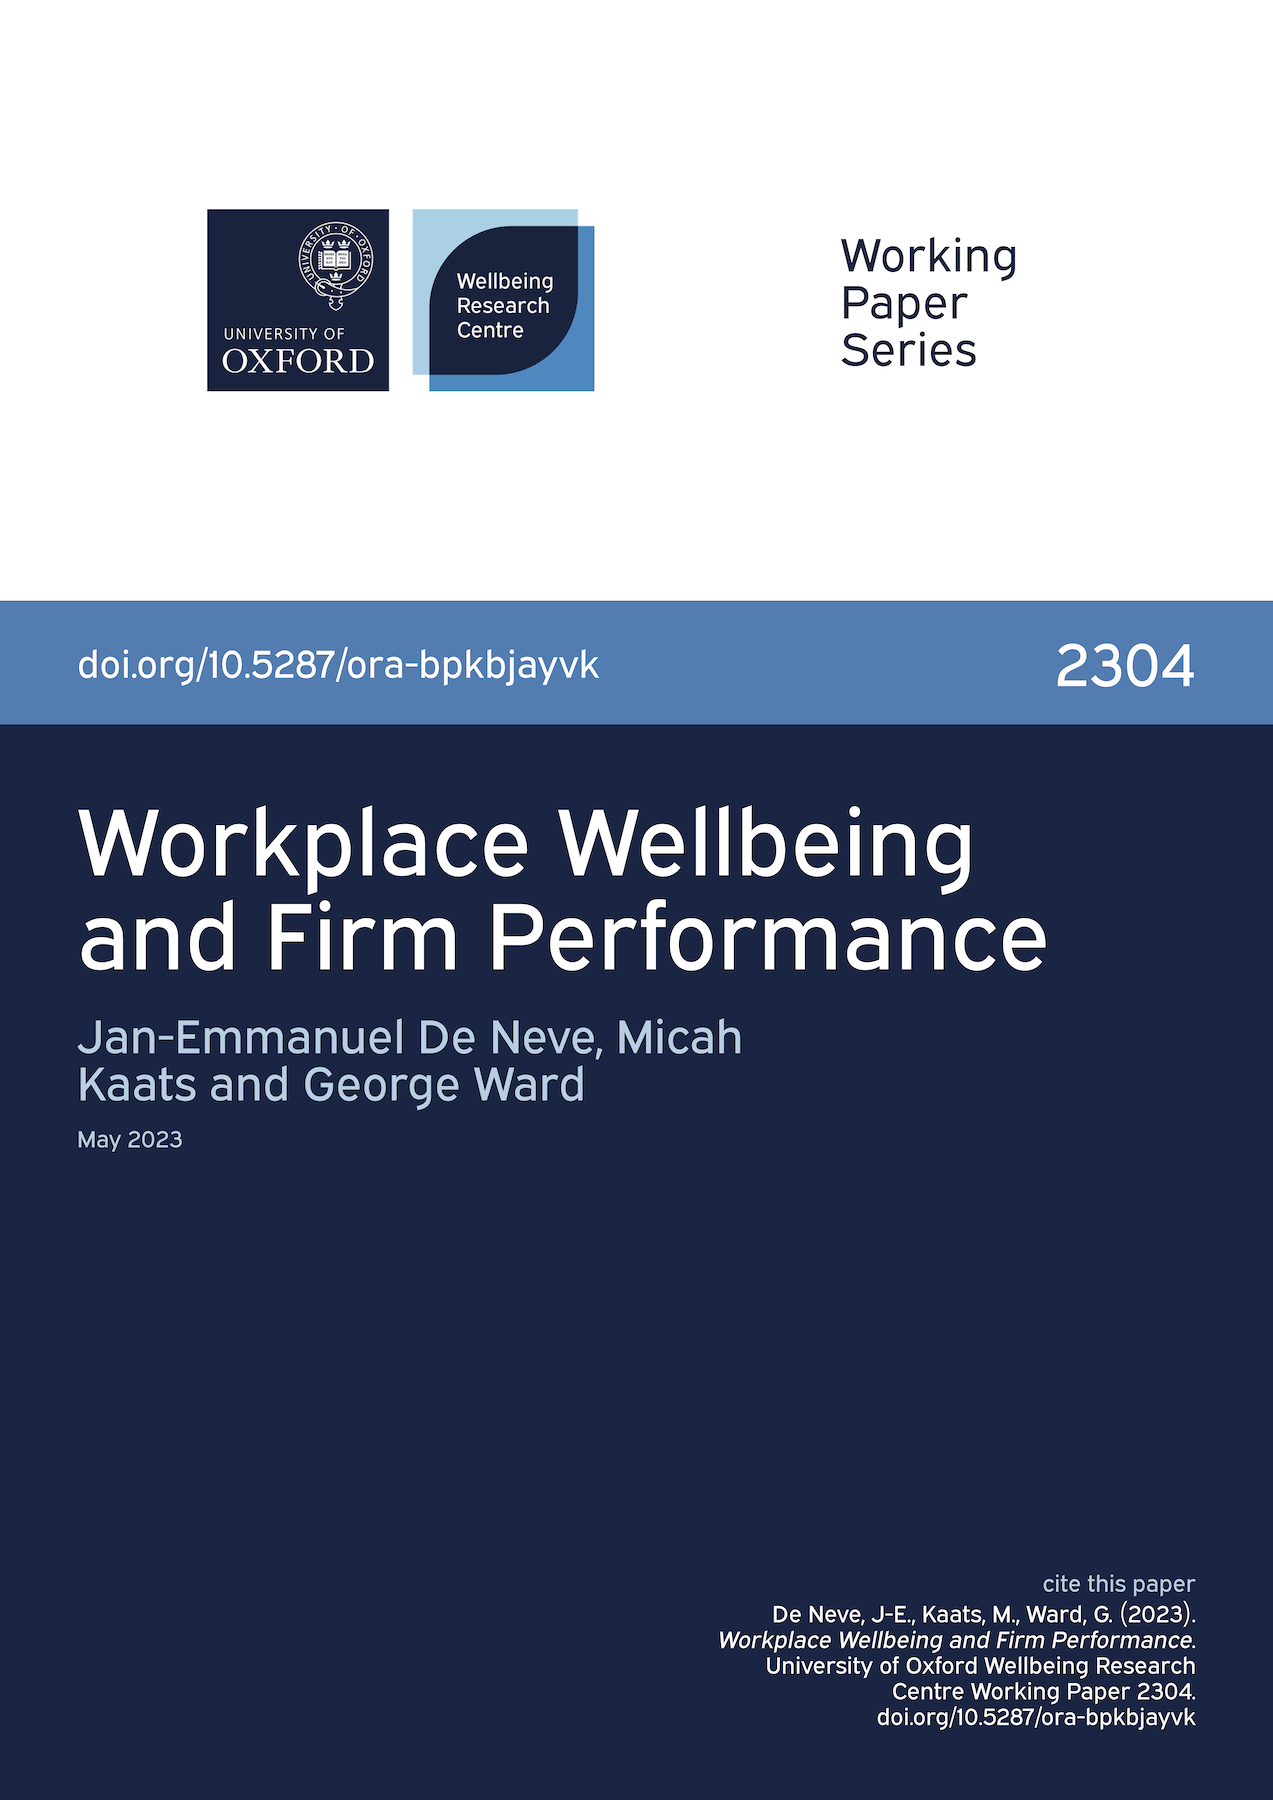 Cover for Working Paper 2304, Workplace Wellbeing and Firm Performance.